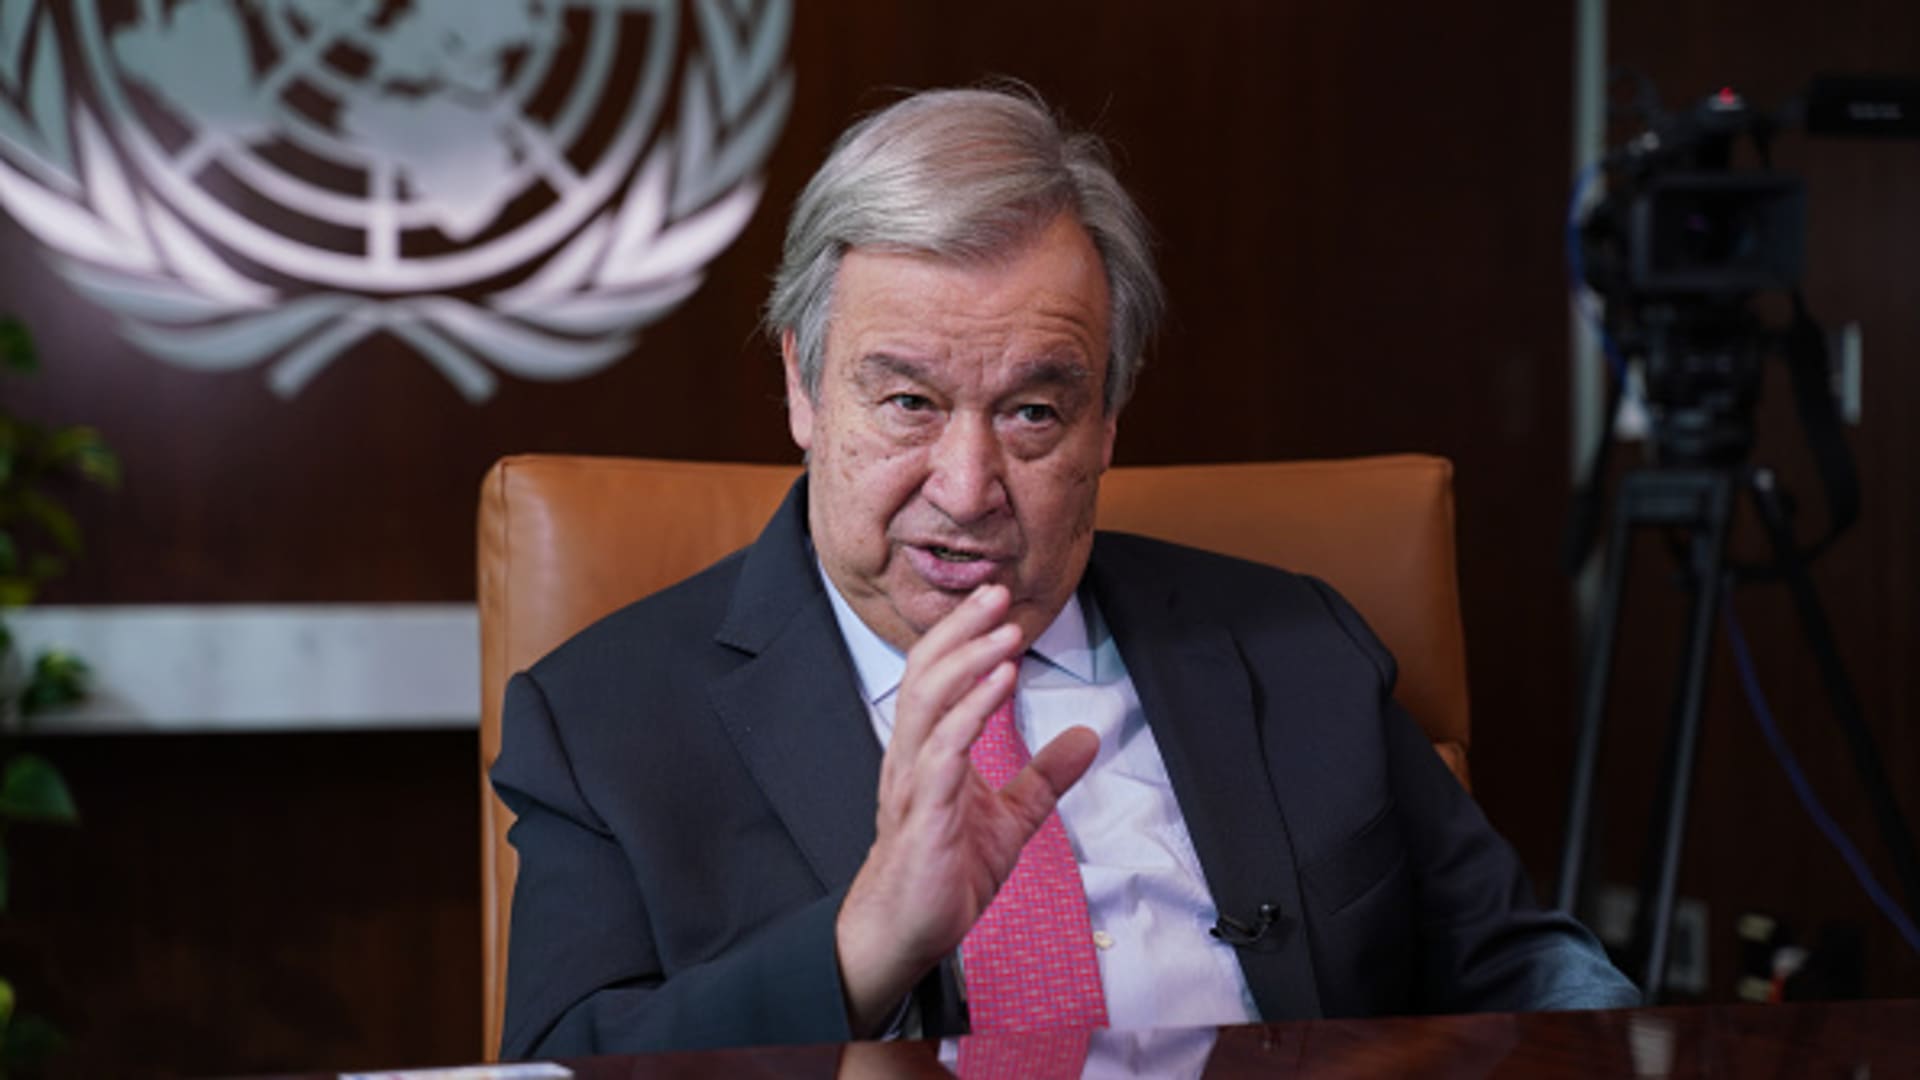 United Nations Secretary-General Antonio Guterres speaks during an exclusive interview with Anadolu Agency ahead of UN's 77th session of the General Assembly in New York, United States on September 14, 2022.